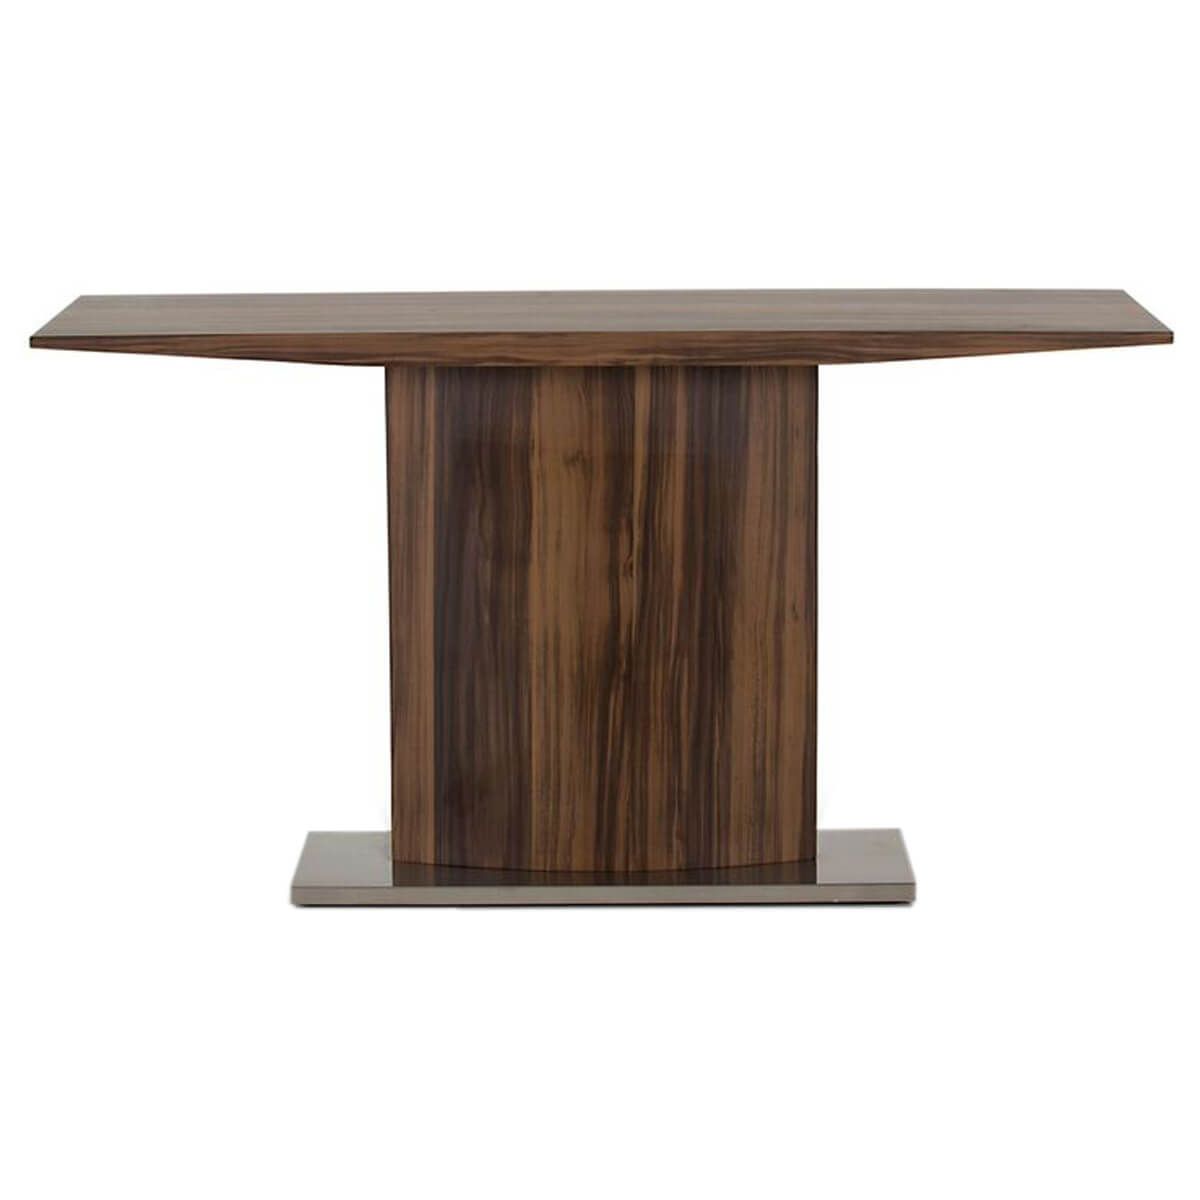 Messina Walnut Console Table & Stainless Steel | Free Delivery | Fads Intended For Walnut Console Tables (View 18 of 20)